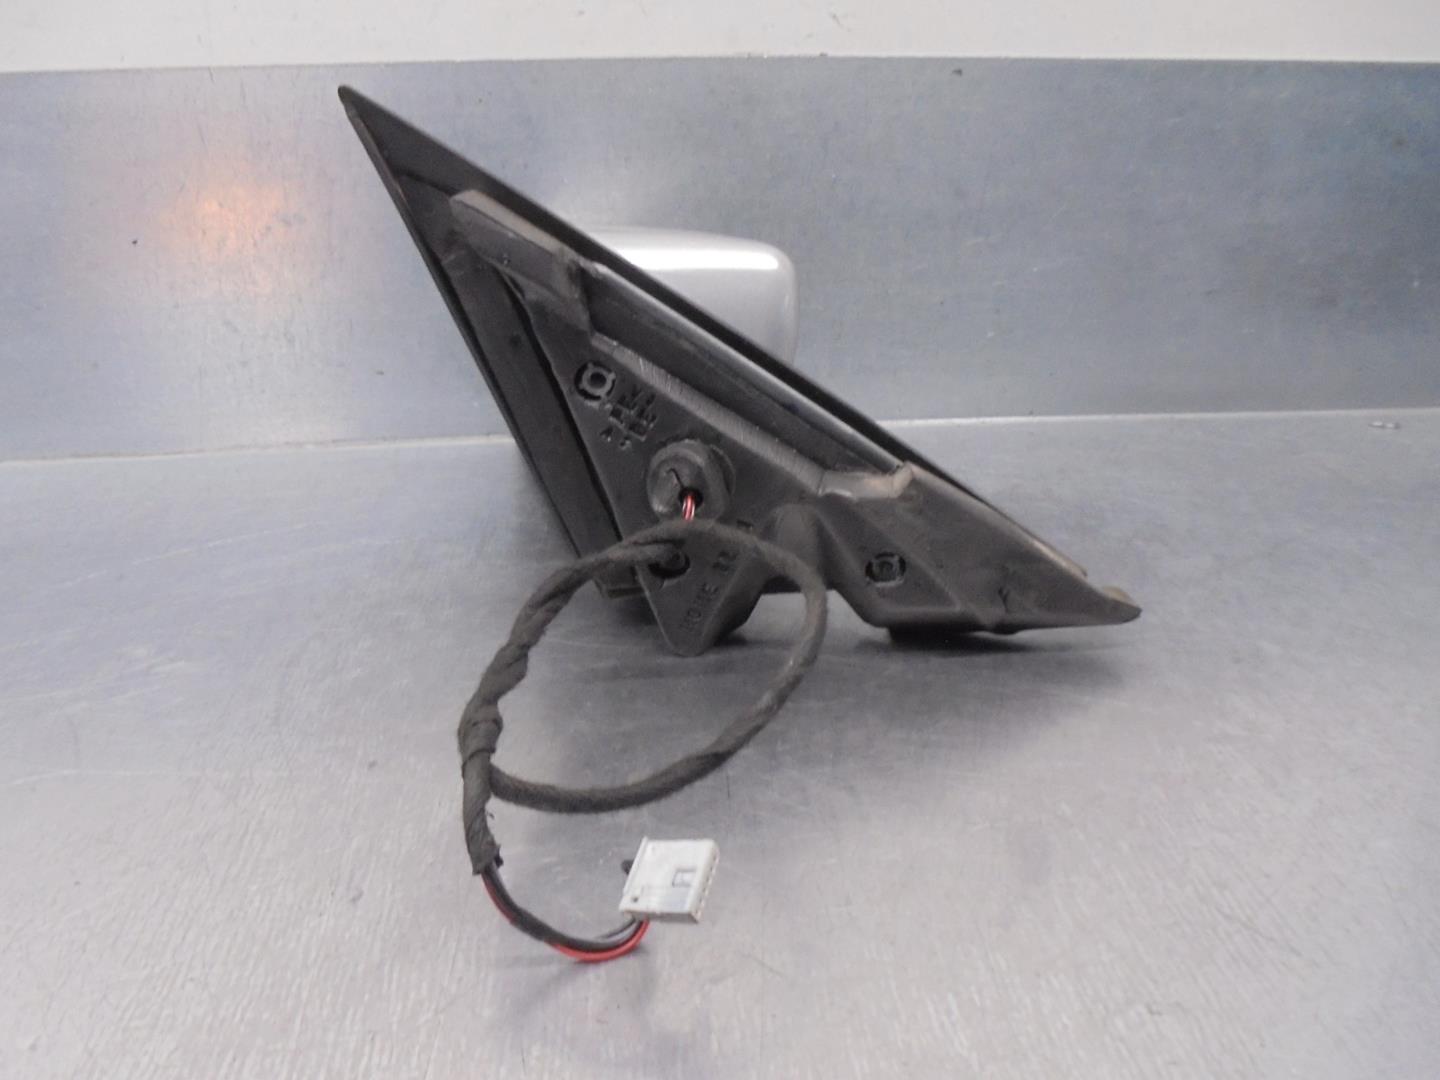 BMW 3 Series E46 (1997-2006) Left Side Wing Mirror 51168245125, 5PINES, GRIS4PUERTAS 24203651